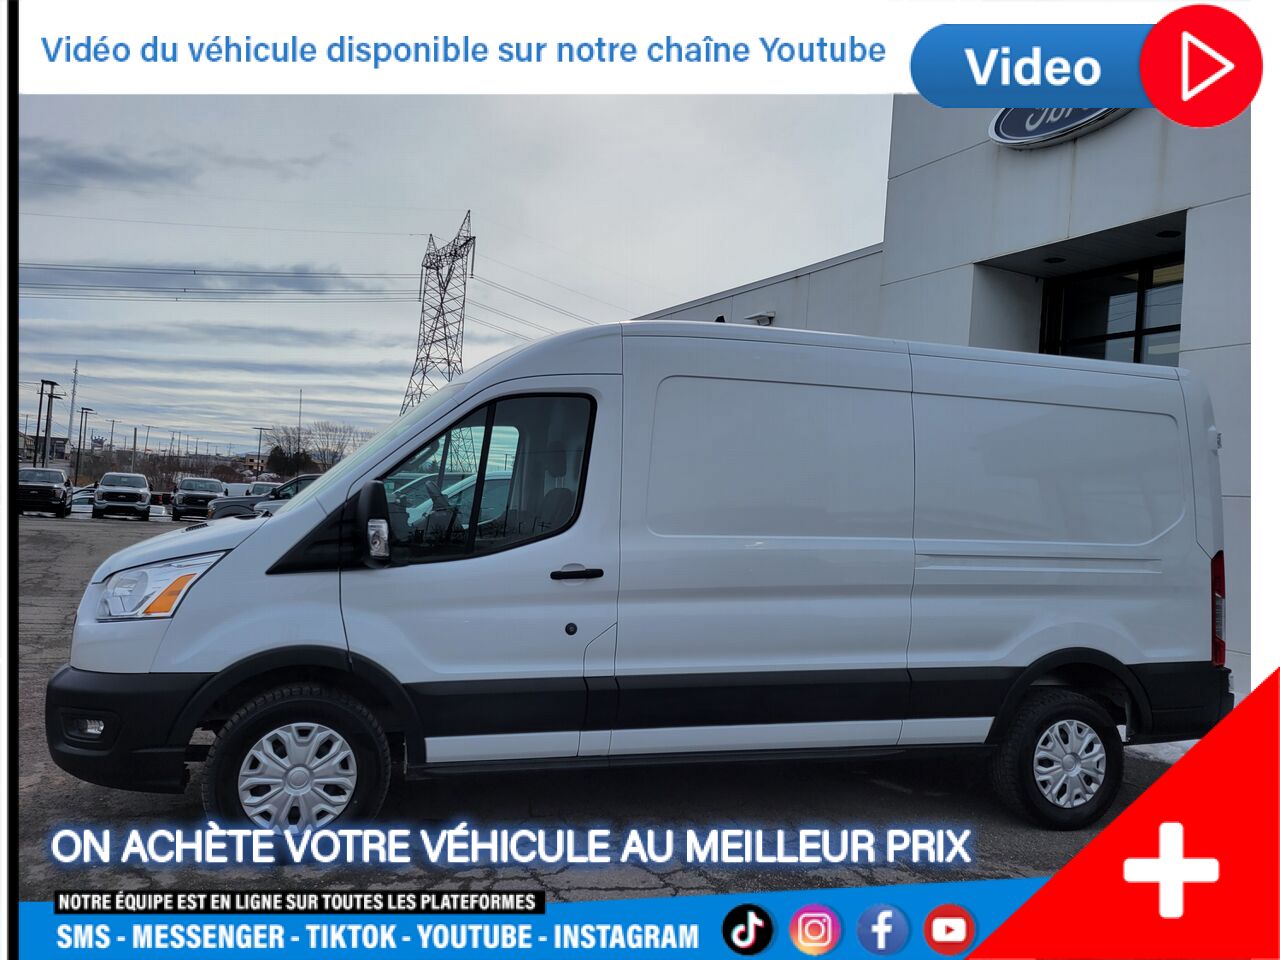 2021 Ford Transit fourgon utilitaire Granby - photo #3